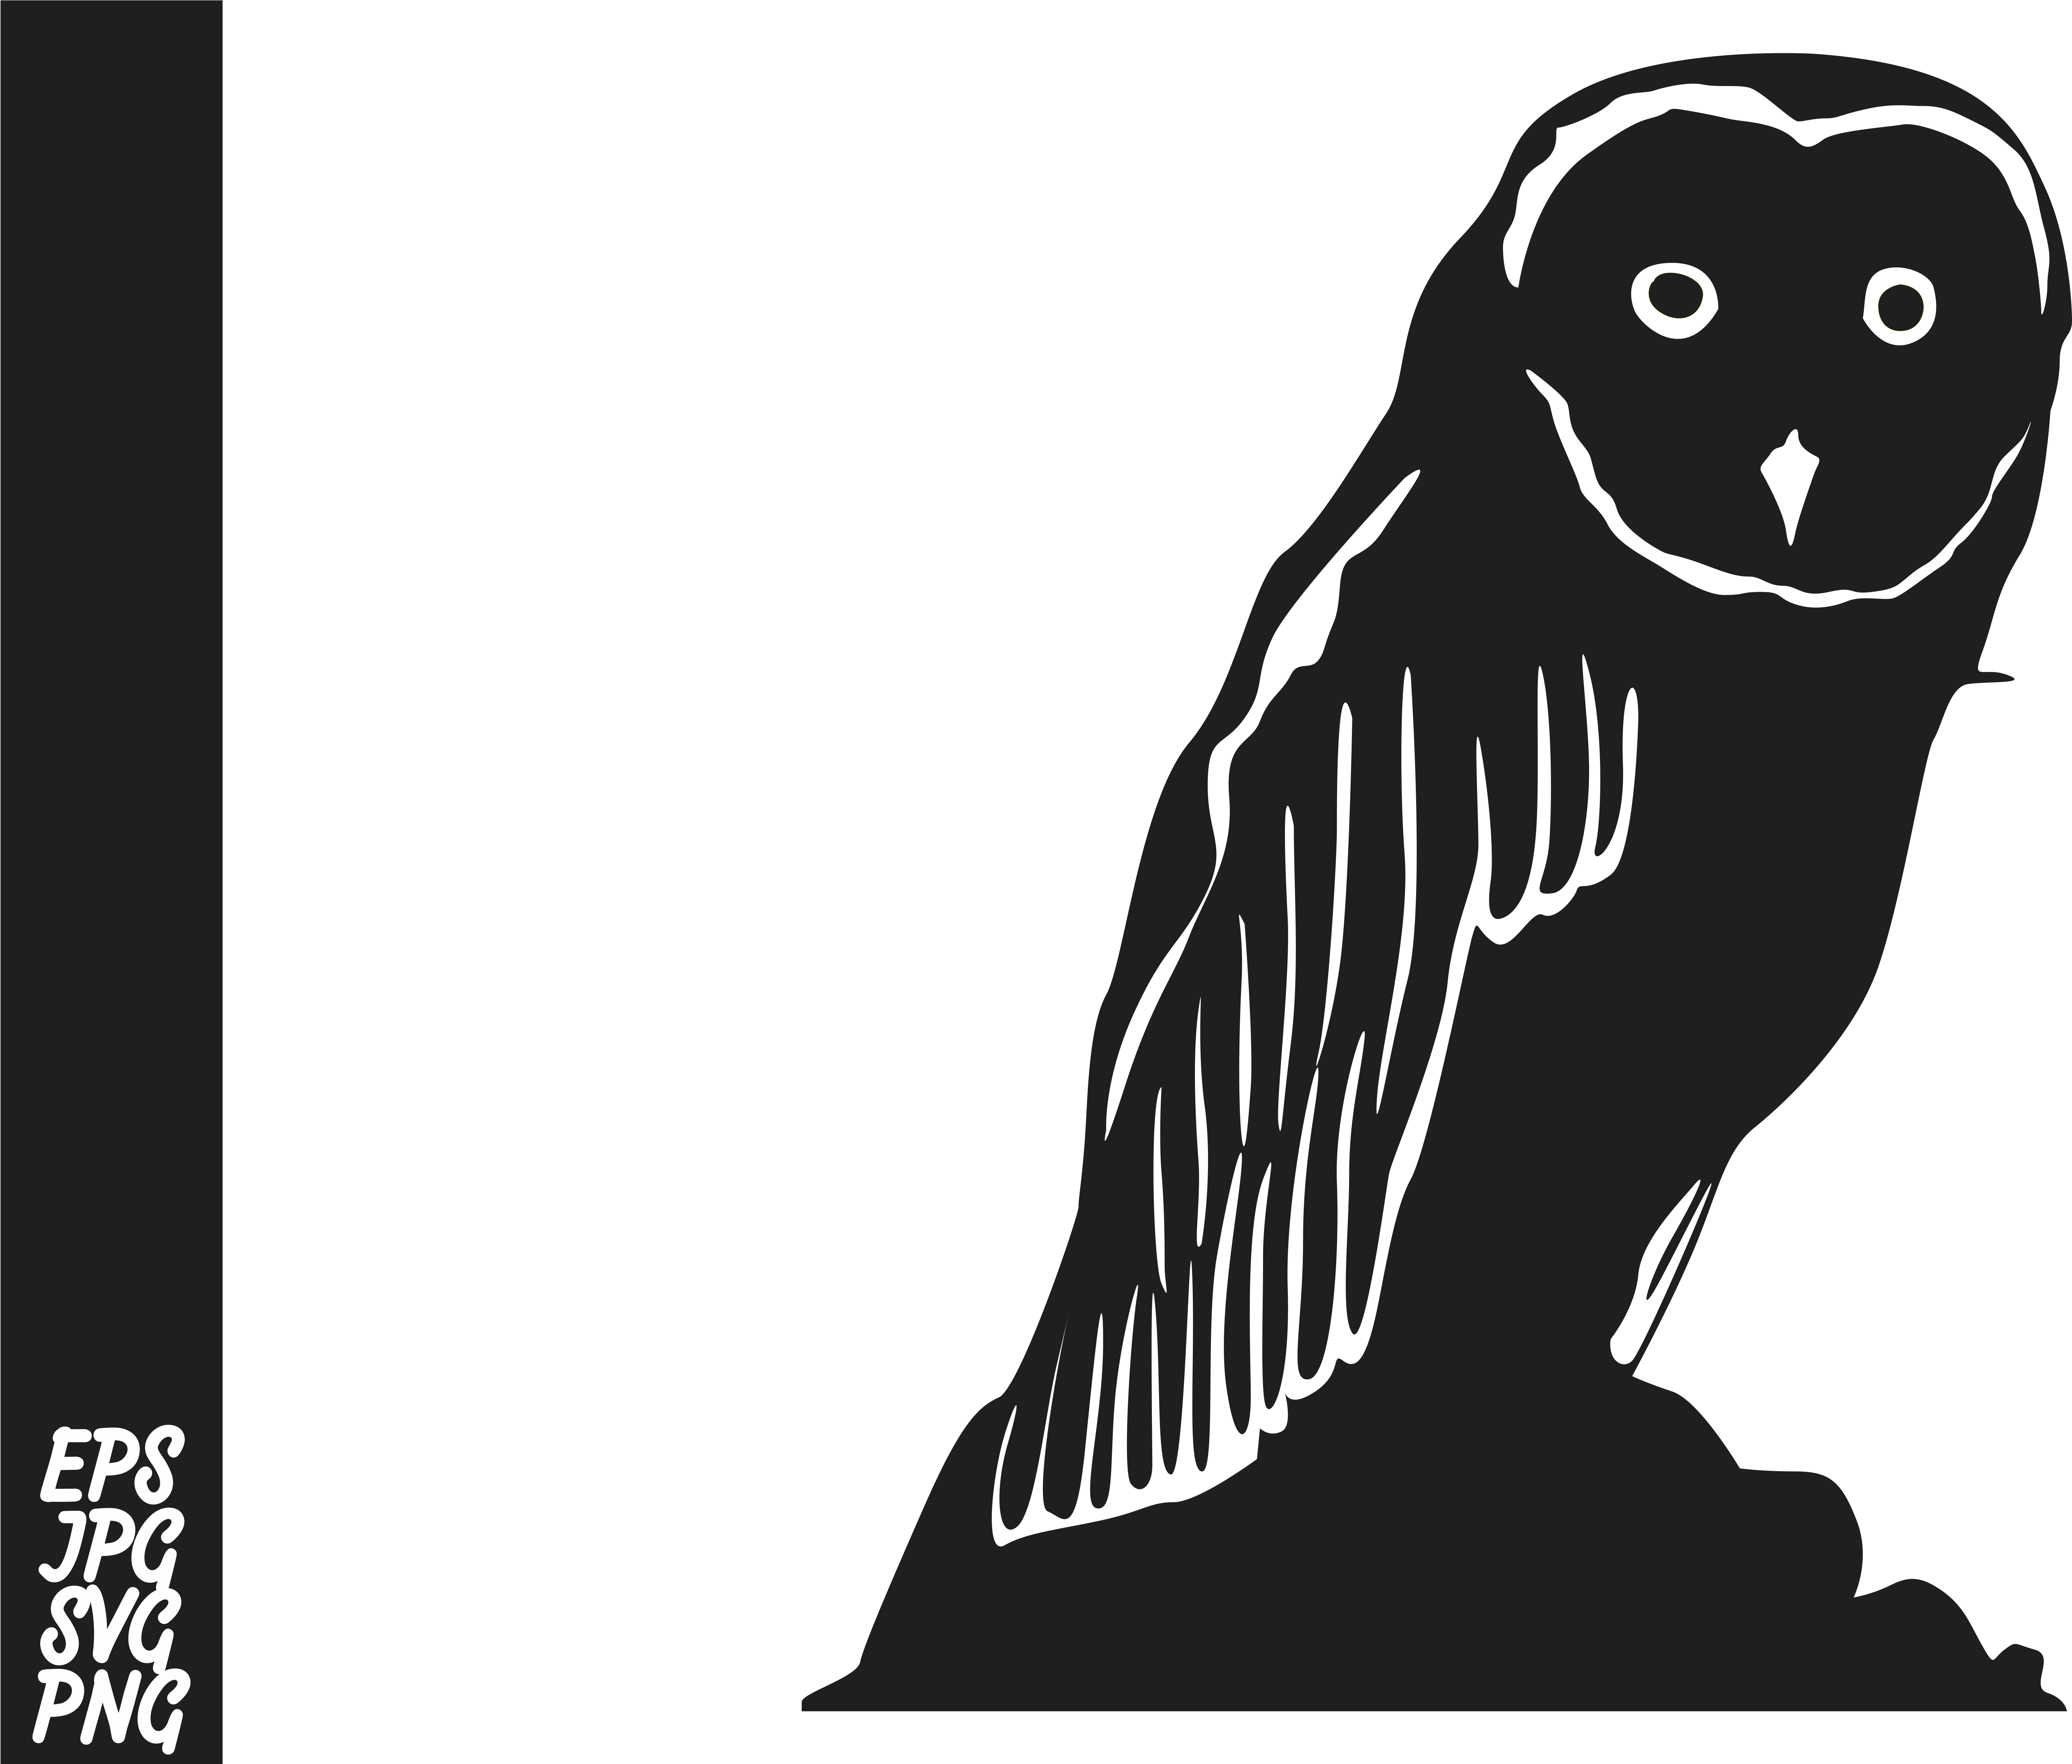 Free Owl Silhouette Png, Download Free Owl Silhouette Png png images ...